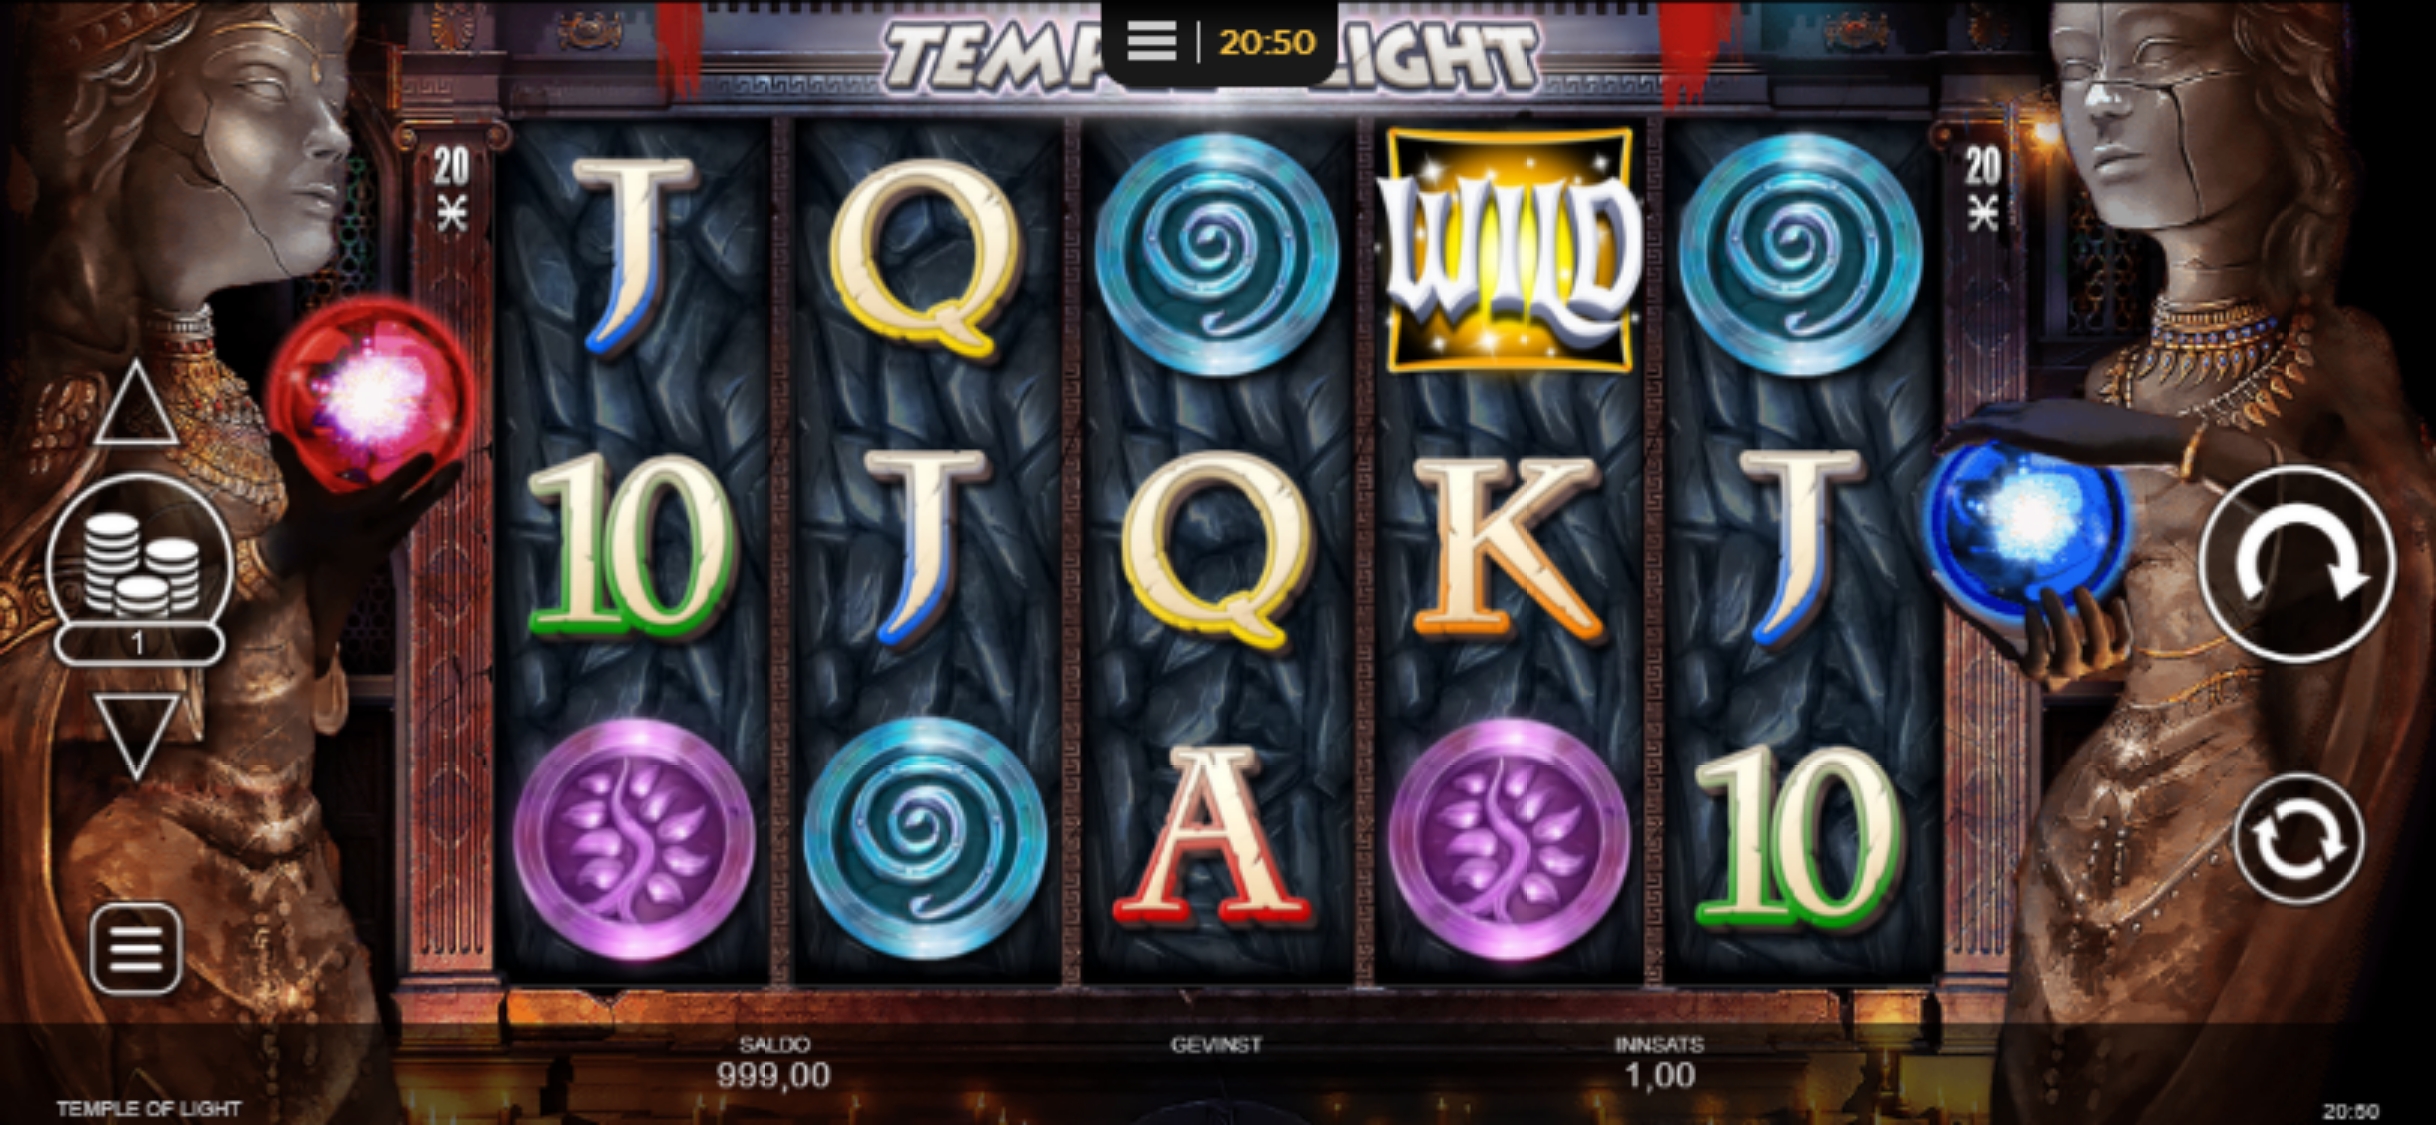 Norske Automater Casino Mobile Slot Games Review